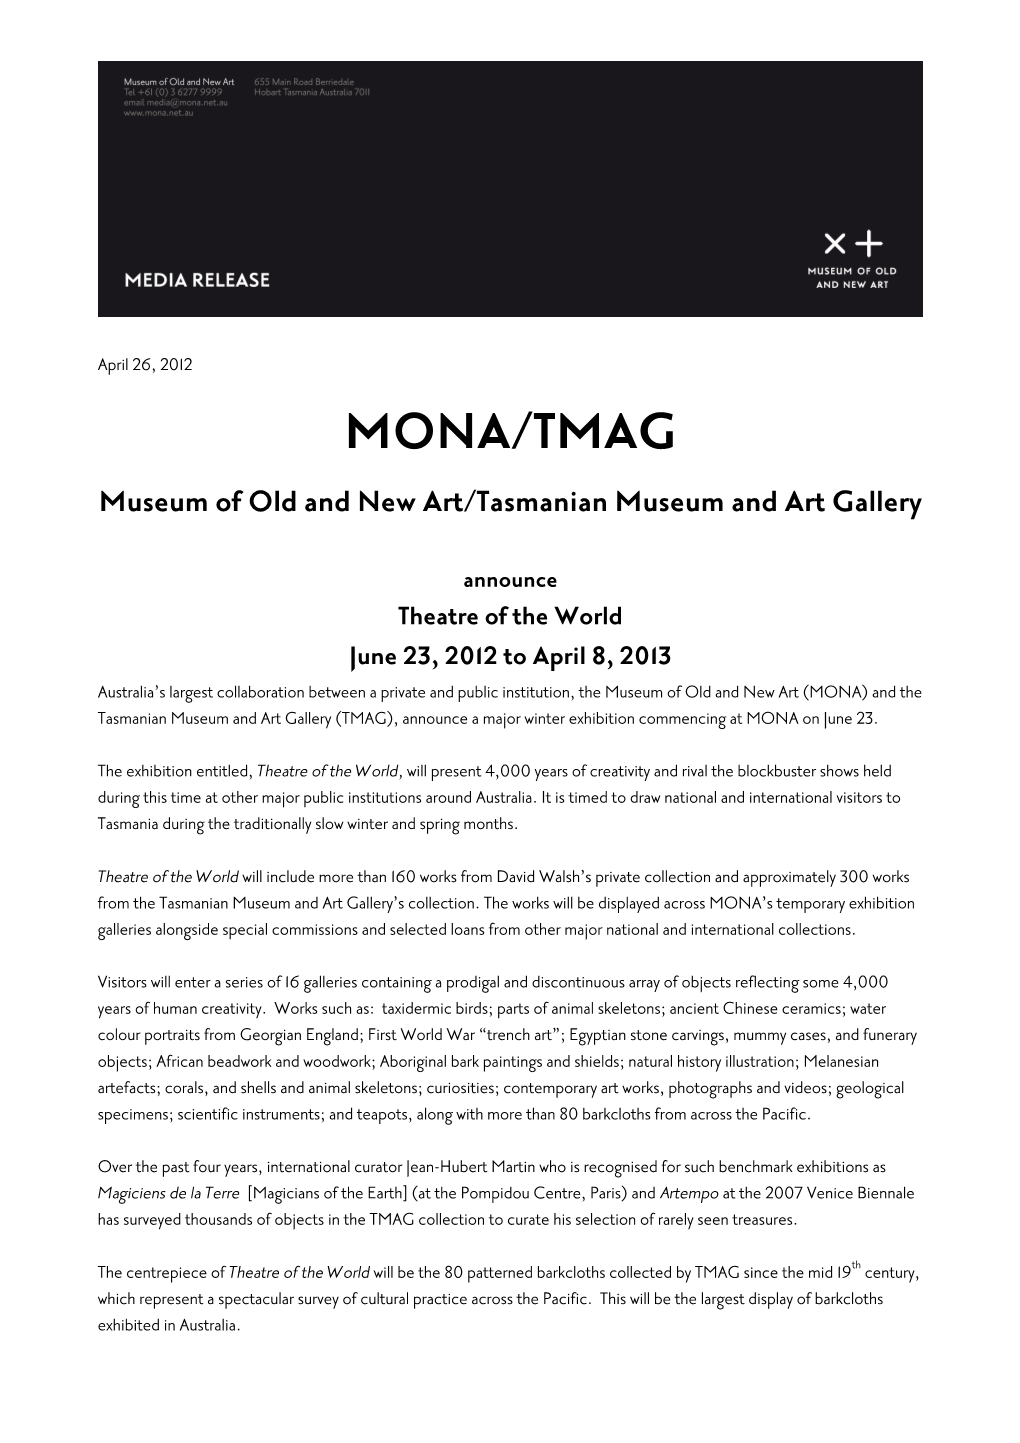 MONA/TMAG Museum of Old and New Art/Tasmanian Museum and Art Gallery